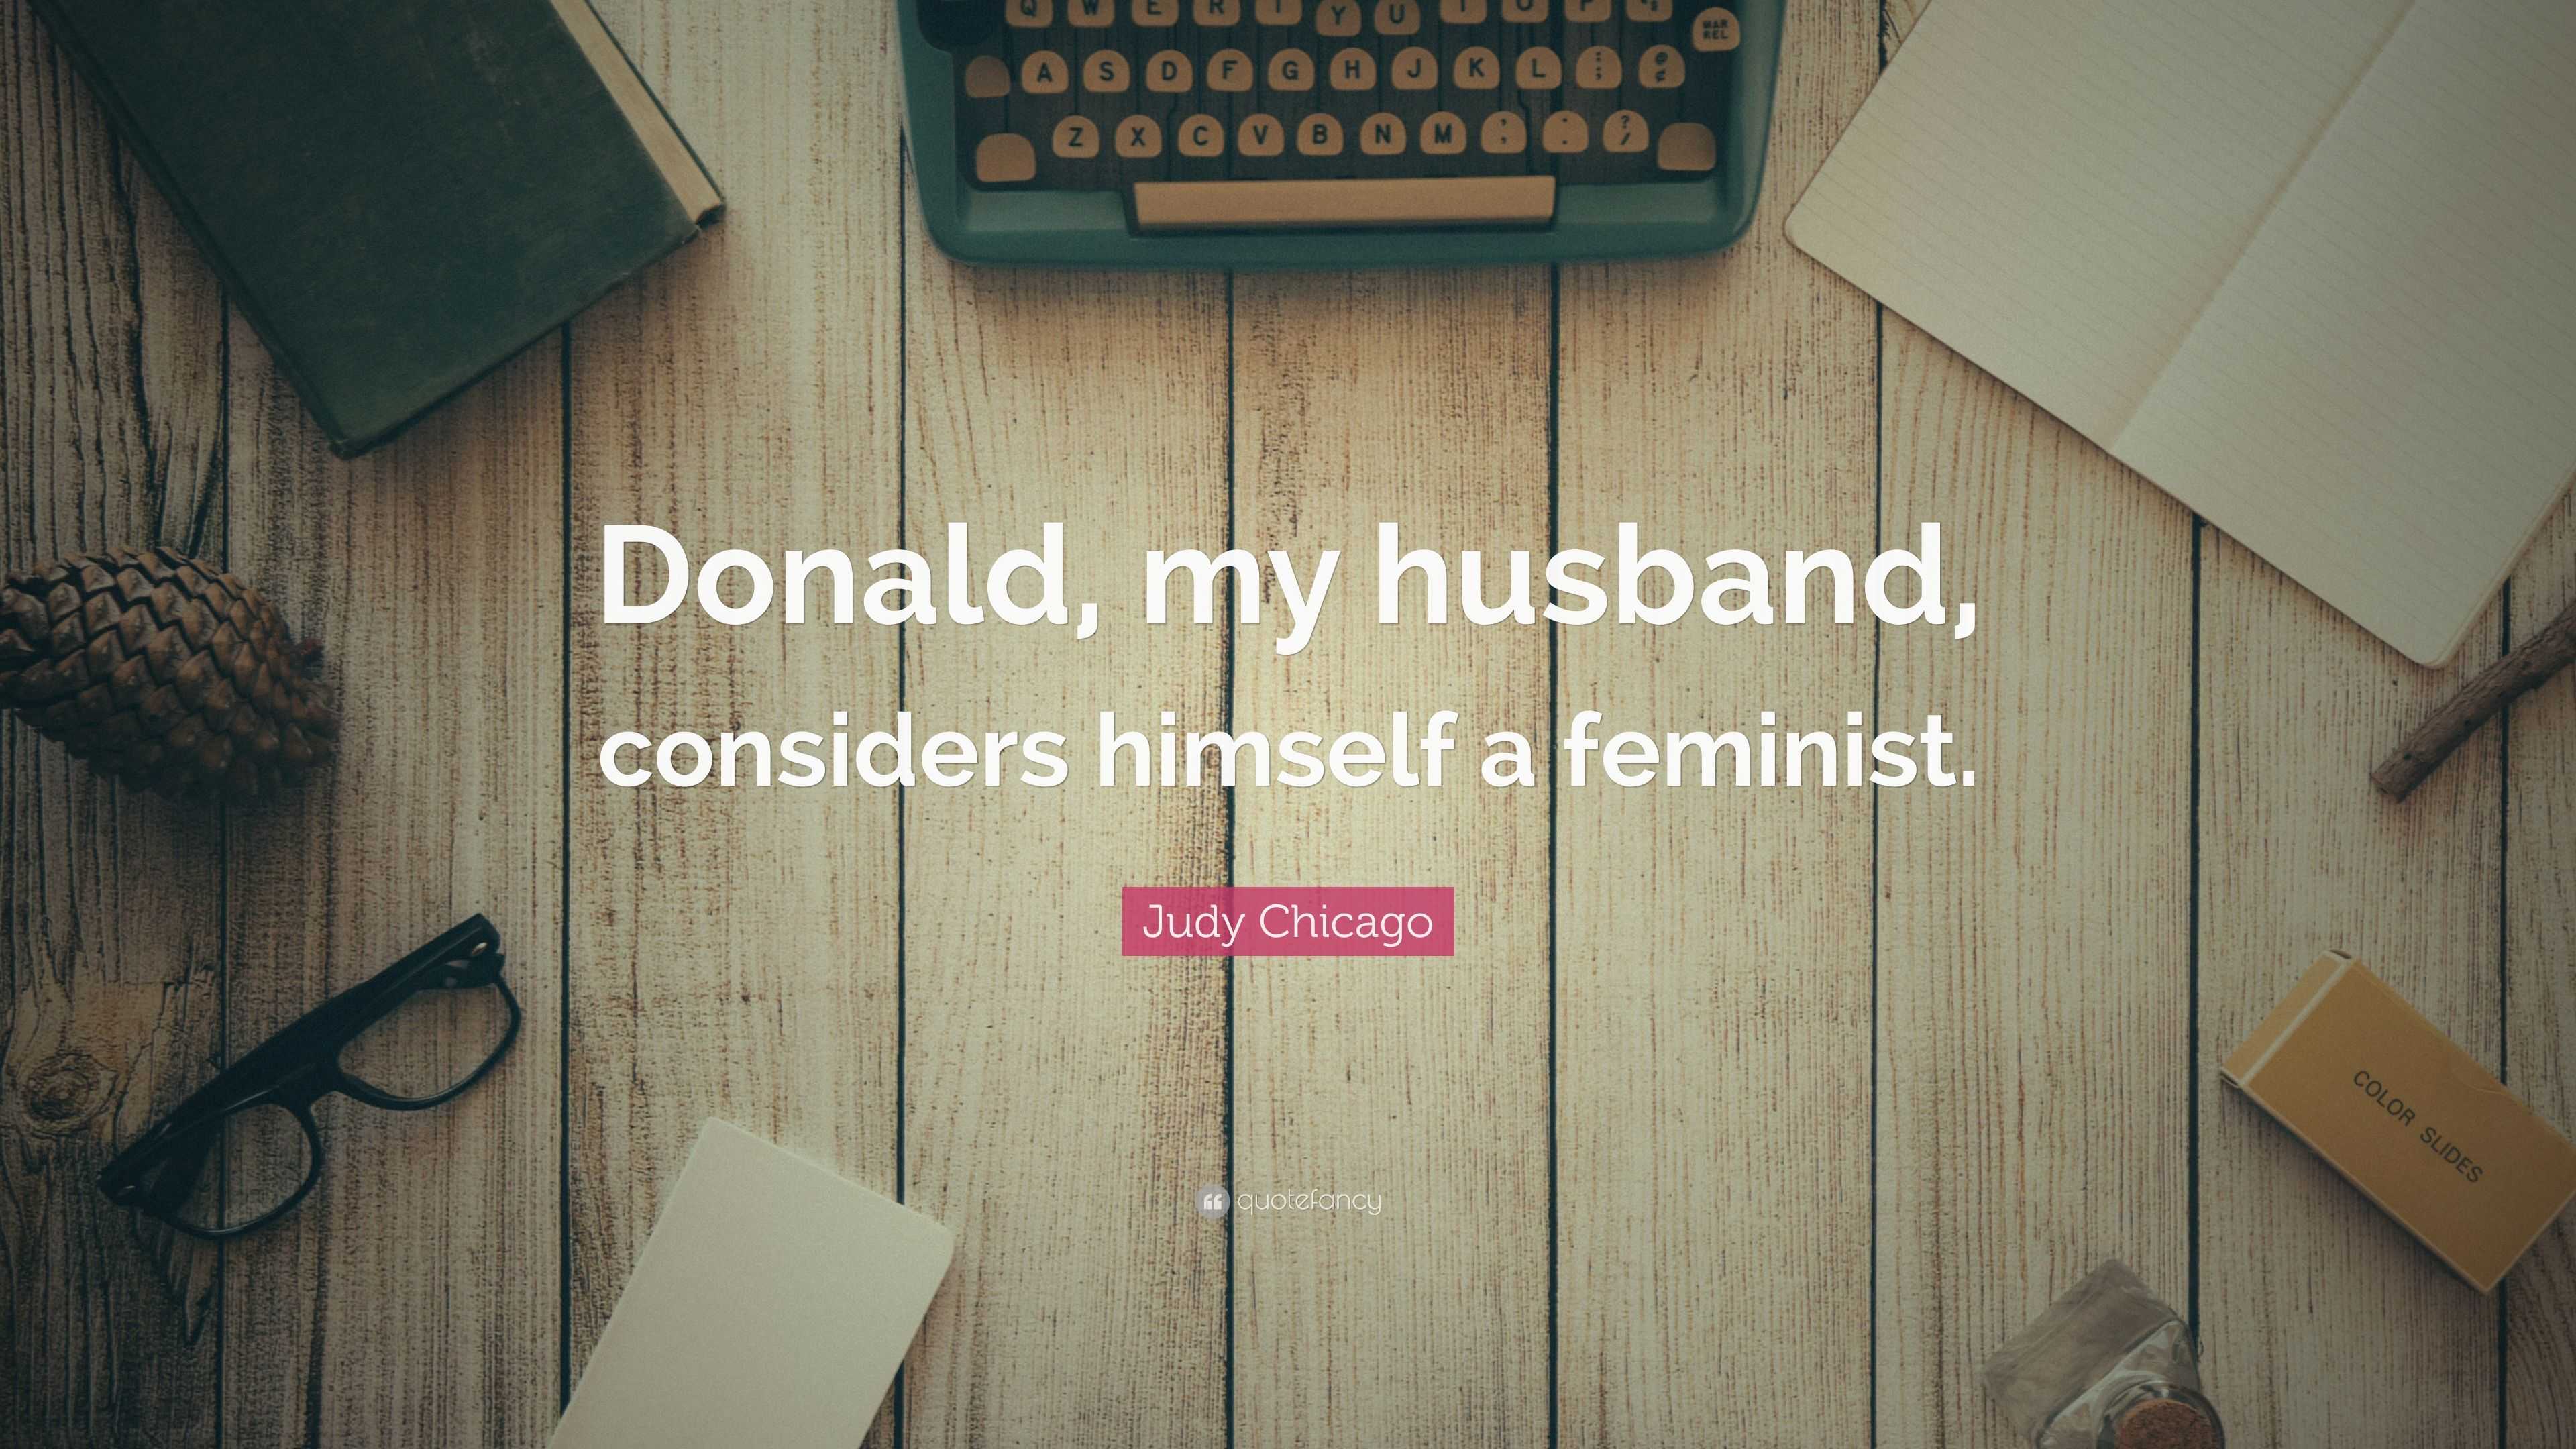 Judy Chicago Quote: “Donald, my husband, considers himself a feminist.”